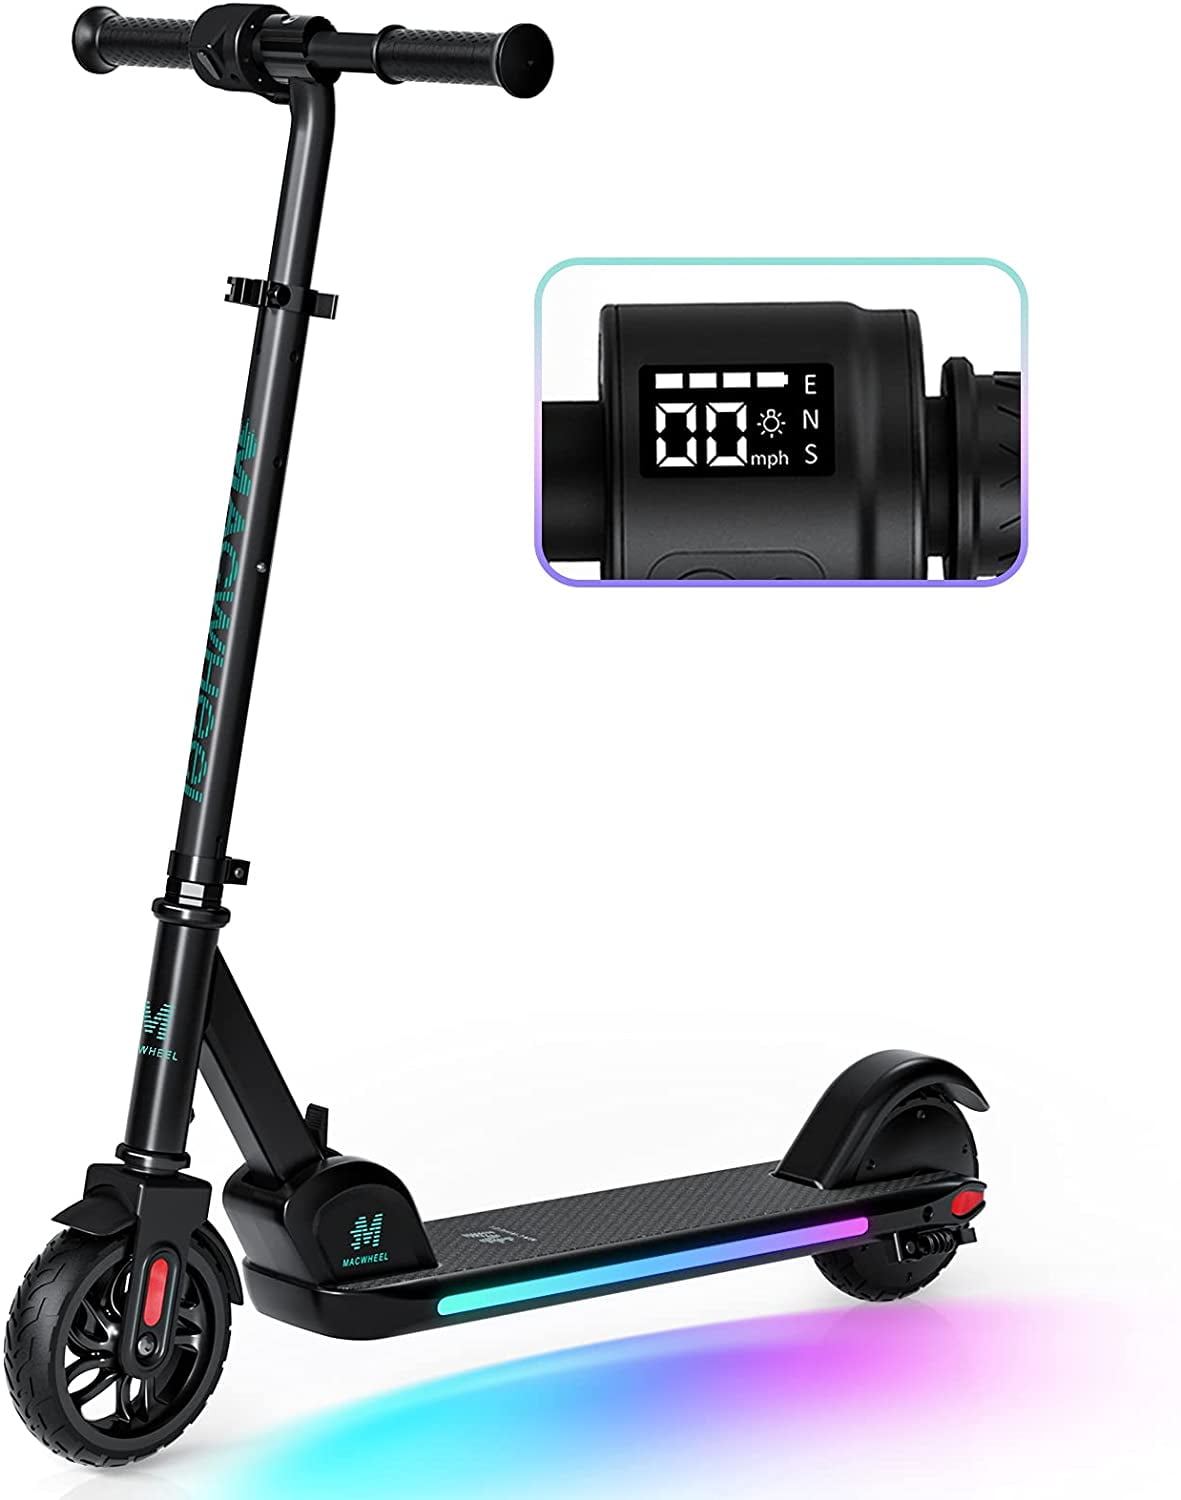 Macwheel Electric Scooter, Electric Scooter for Kids Age 8+, Colorful ...